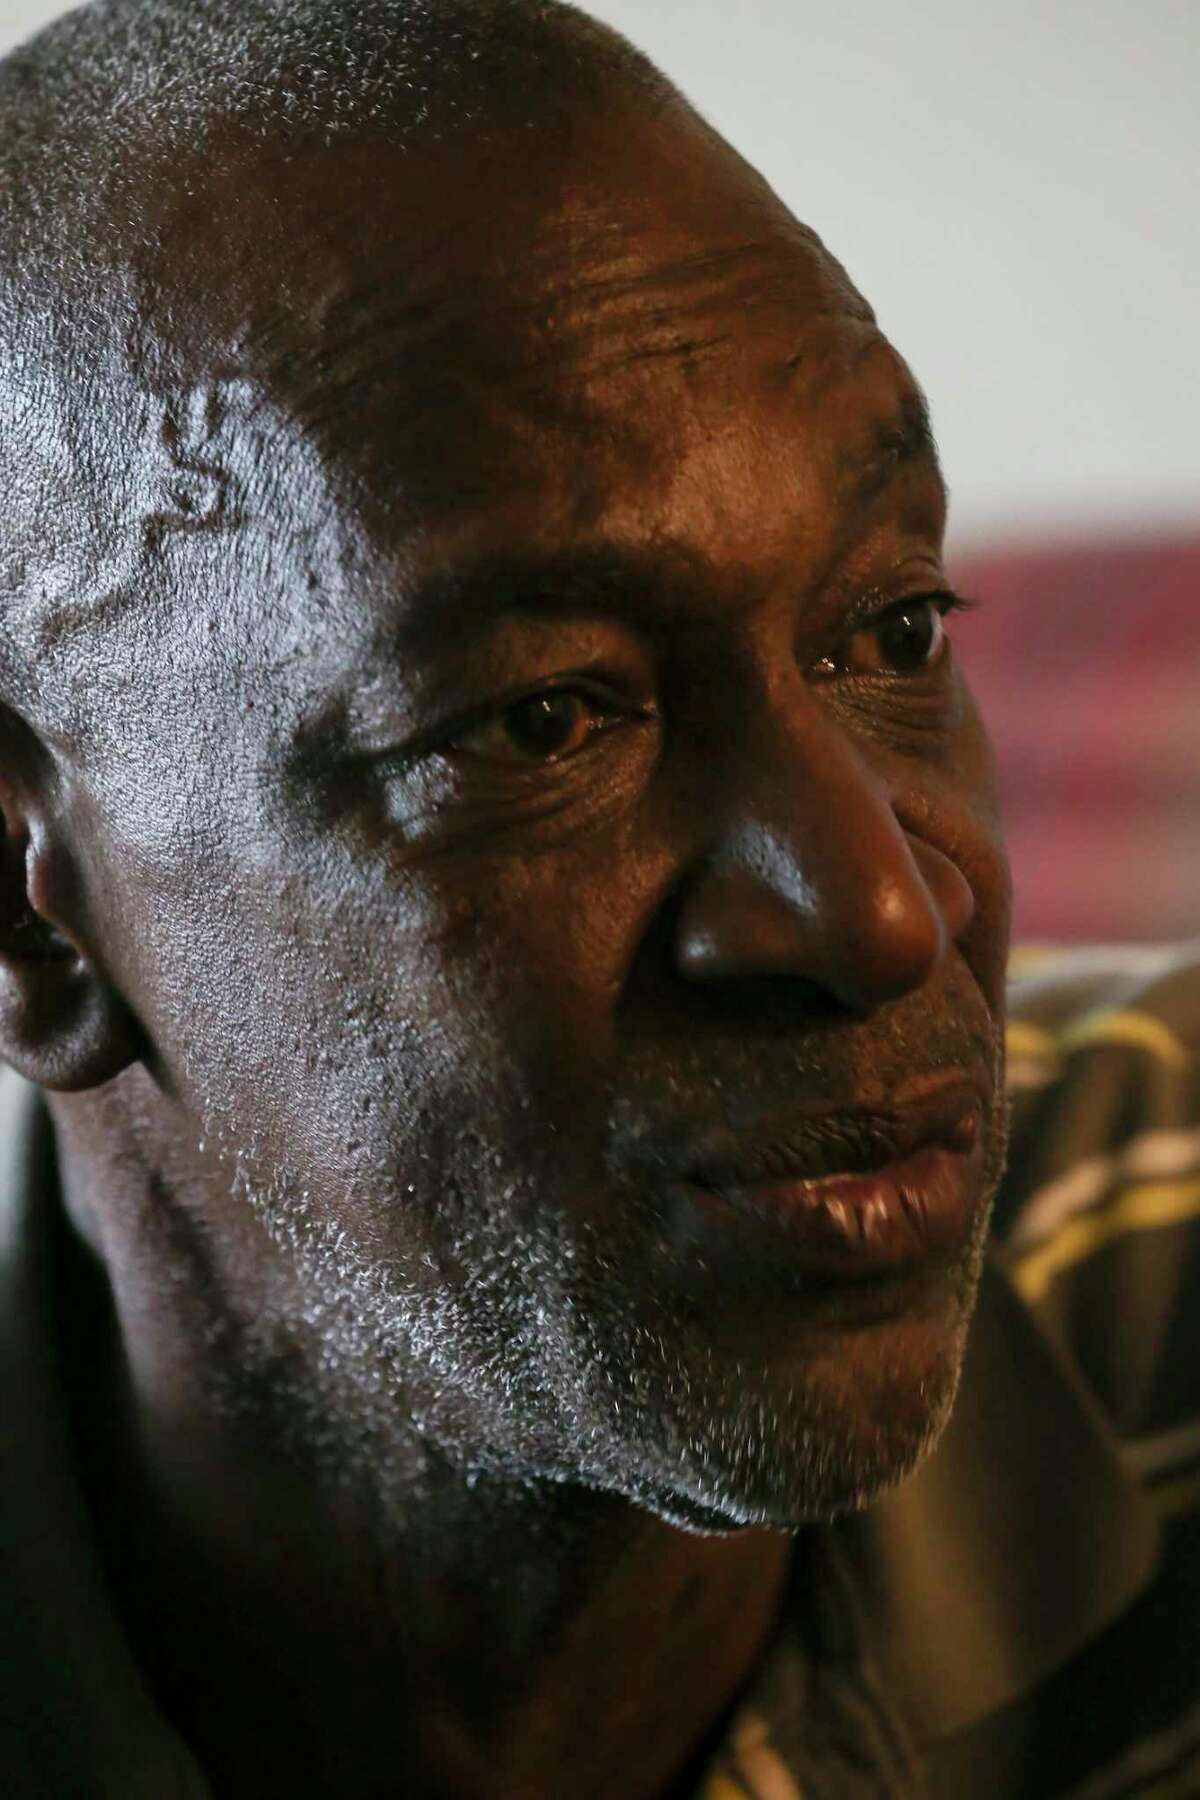 Larry McCoy, 57, reflects on his life during an interview at his apartment, Friday, April 23, 2021. McCoy, a nine-year Air Force veteran who served in Desert Storm, was homeless, not for the first time, when he was kicked out of a previous apartment in July 2019. Suffering from depression and schizophrenia, he was able to rent the apartment with help from the Veteran Affairs Supportive Housing Voucher program. He moved into the apartment in August 2019.